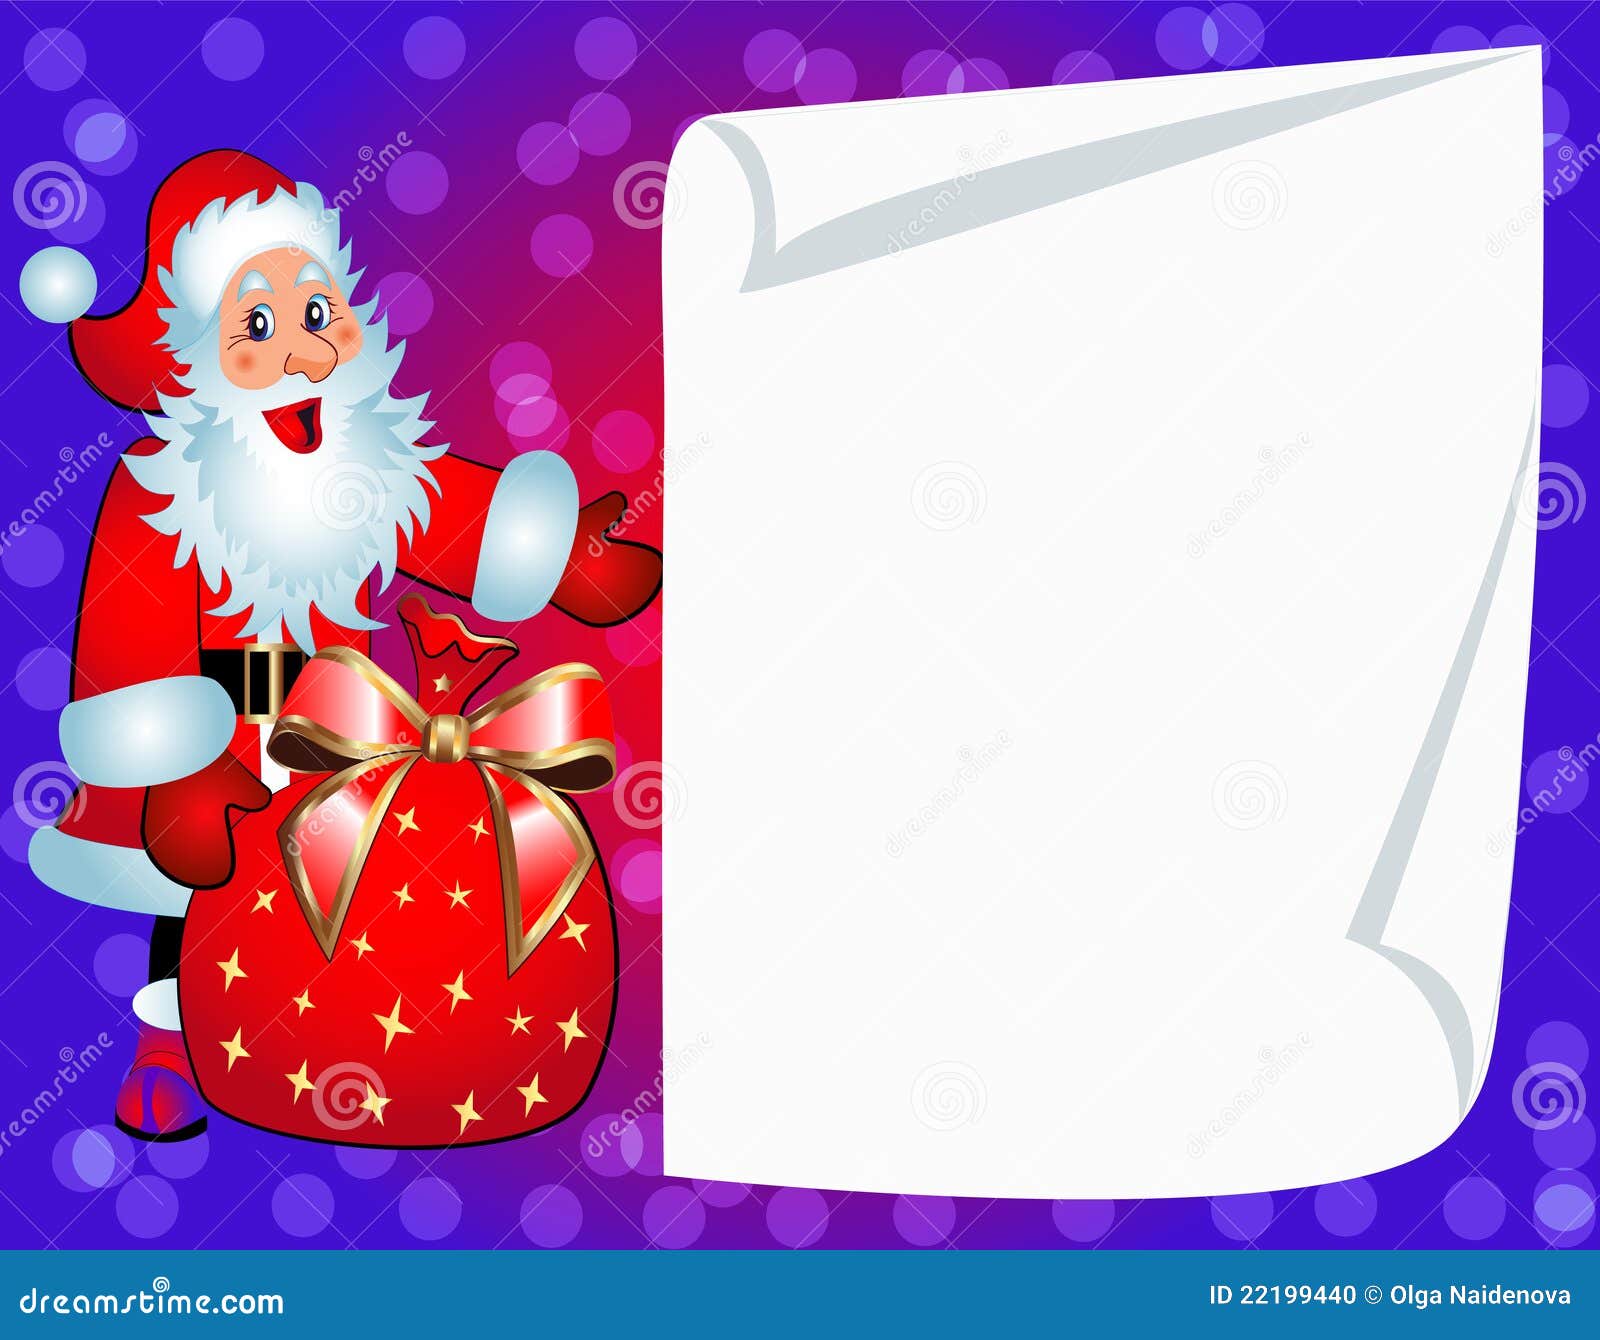 Illustration santa with bag and clean paper for invitation.